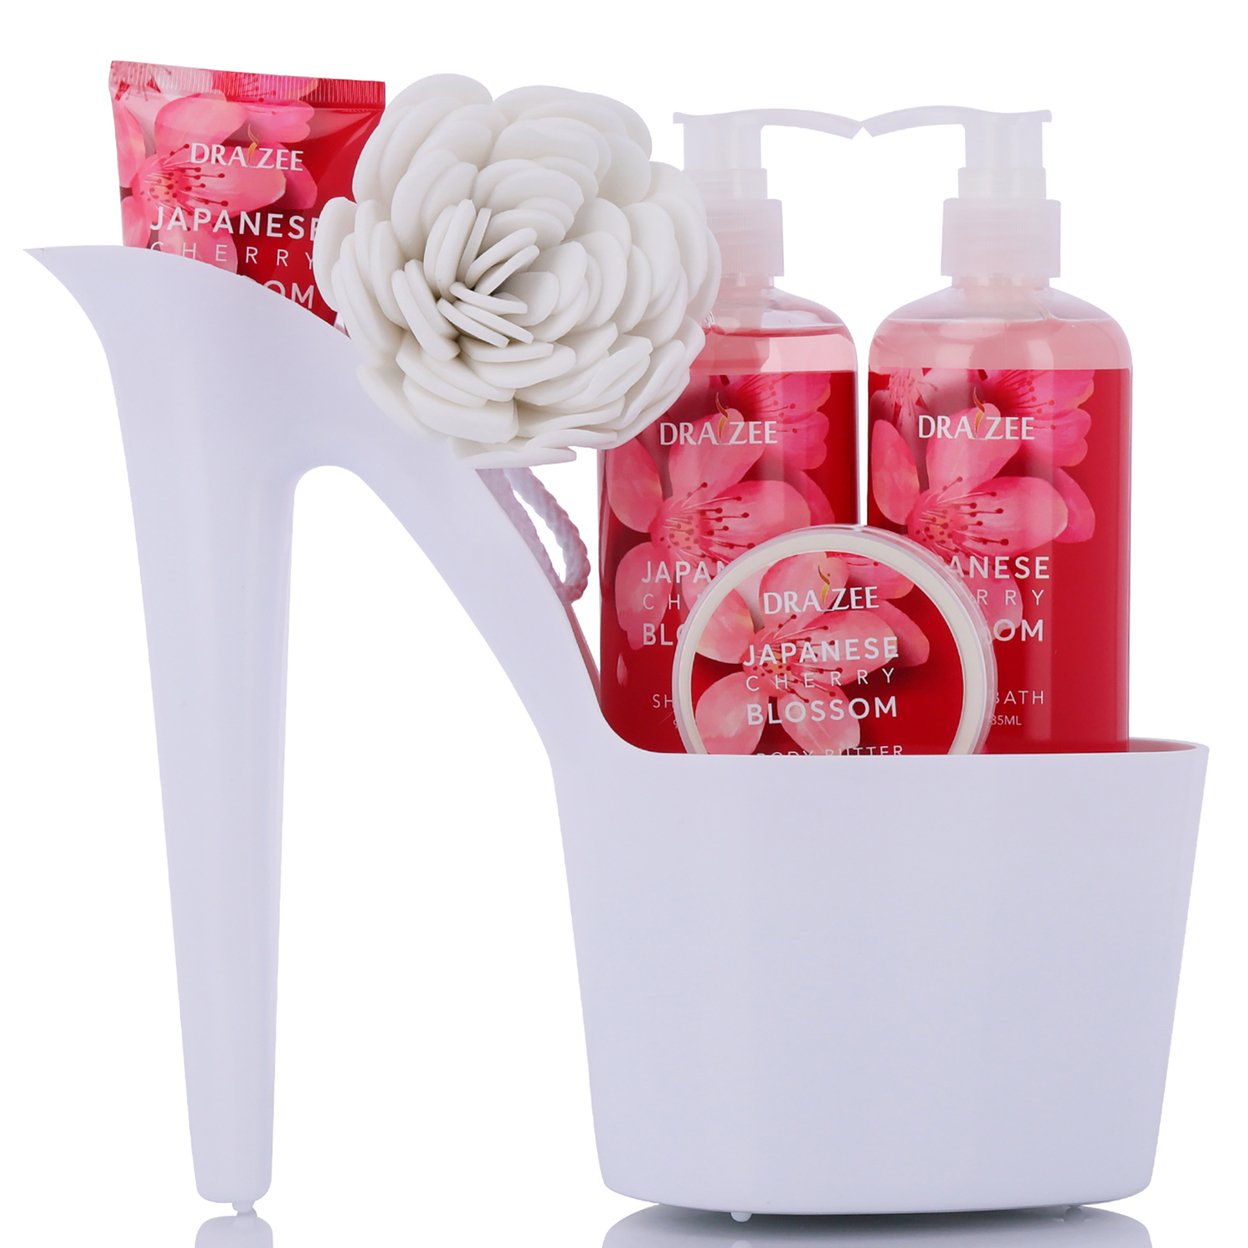 Draizee Heel Shoe Spa Gift Set Cherry Blossom Scented Bath Essentials Gift Basket With Shower Gel, Bubble Bath, Body Butter, Body Lotion